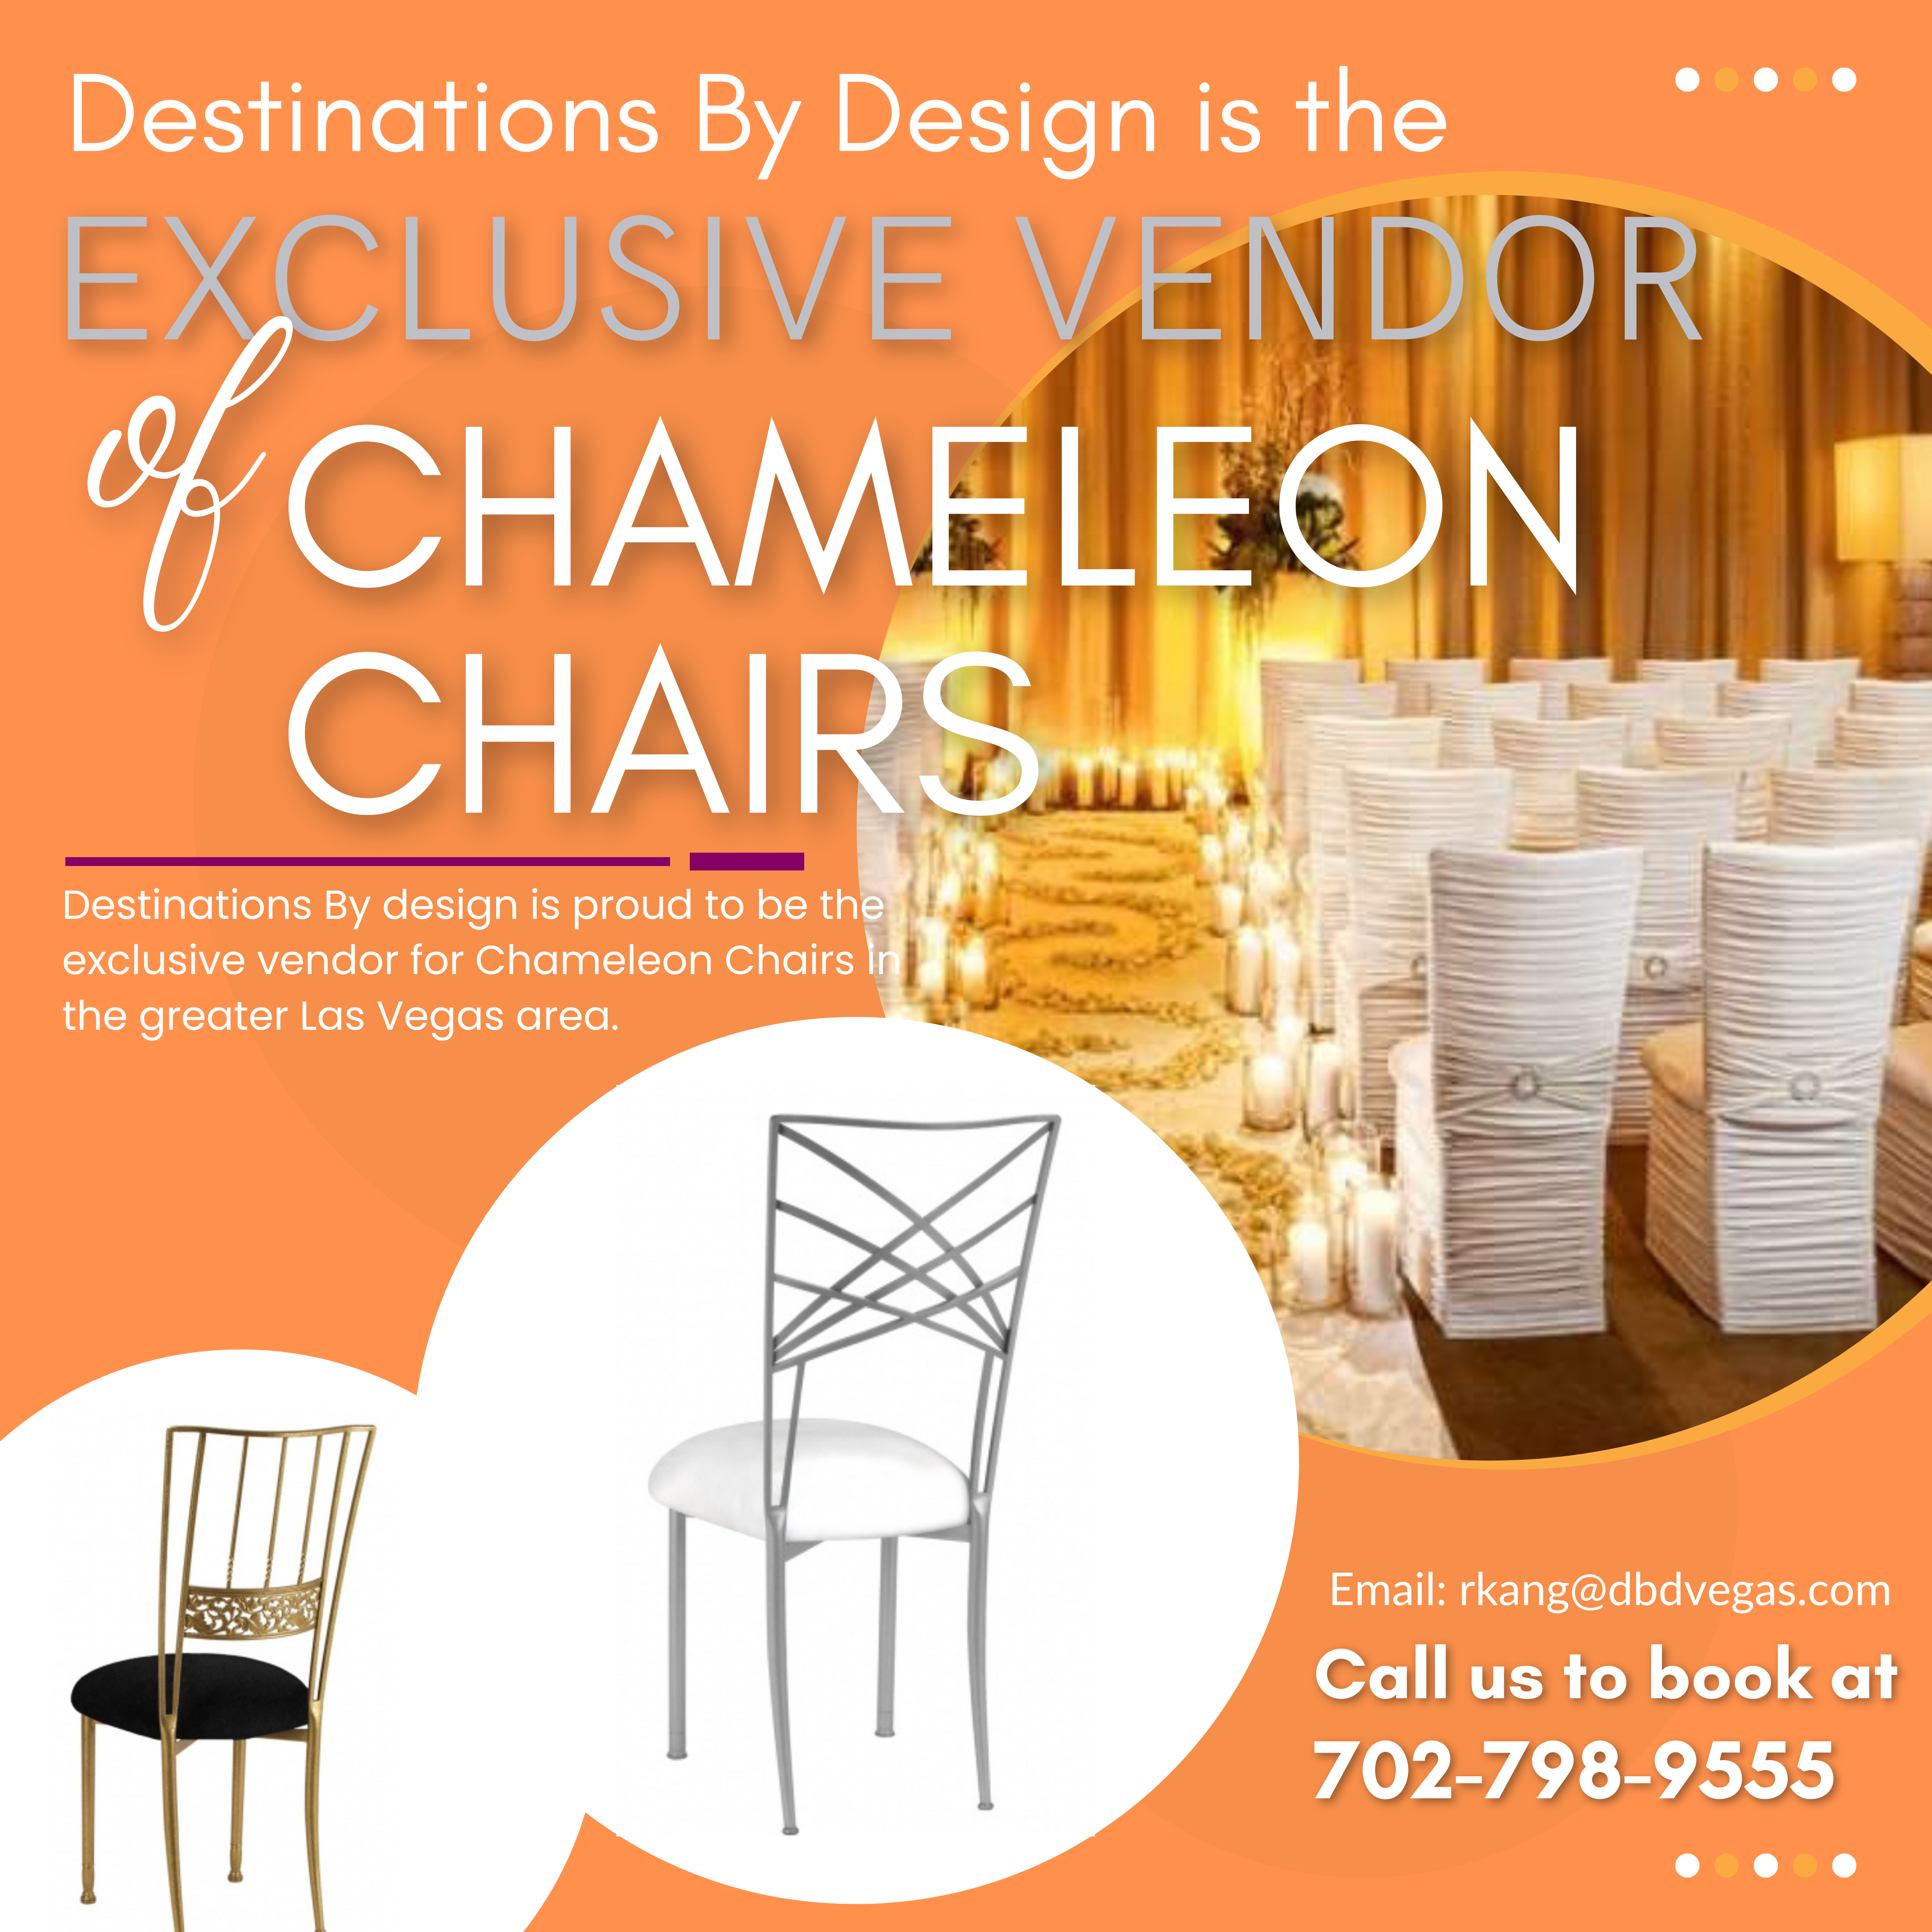 Destinations By Design Named Exclusive and Preferred Supplier of The Chameleon Chair Collection For The Greater Las Vegas Region